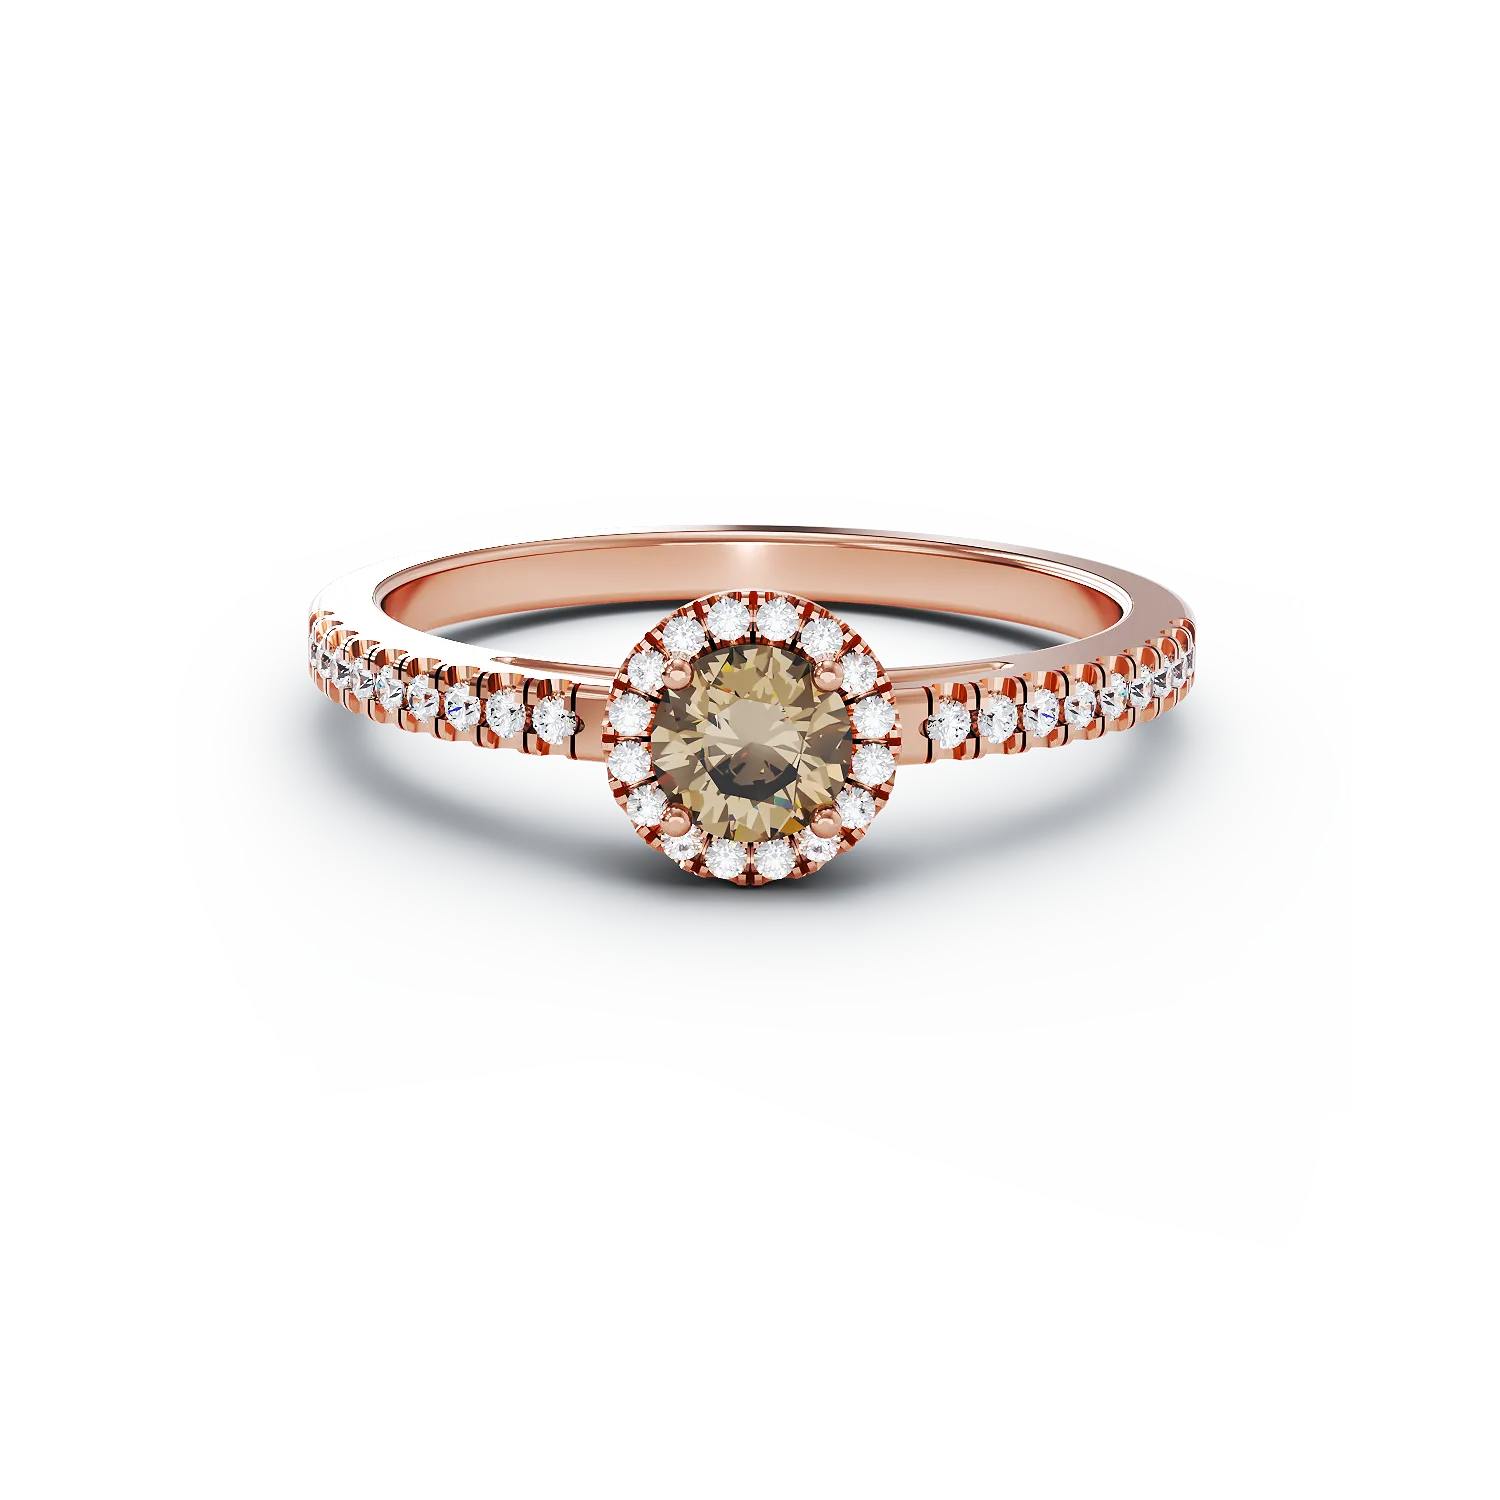 18K rose gold engagement ring with 0.3ct brown diamond and 0.2ct clear diamonds